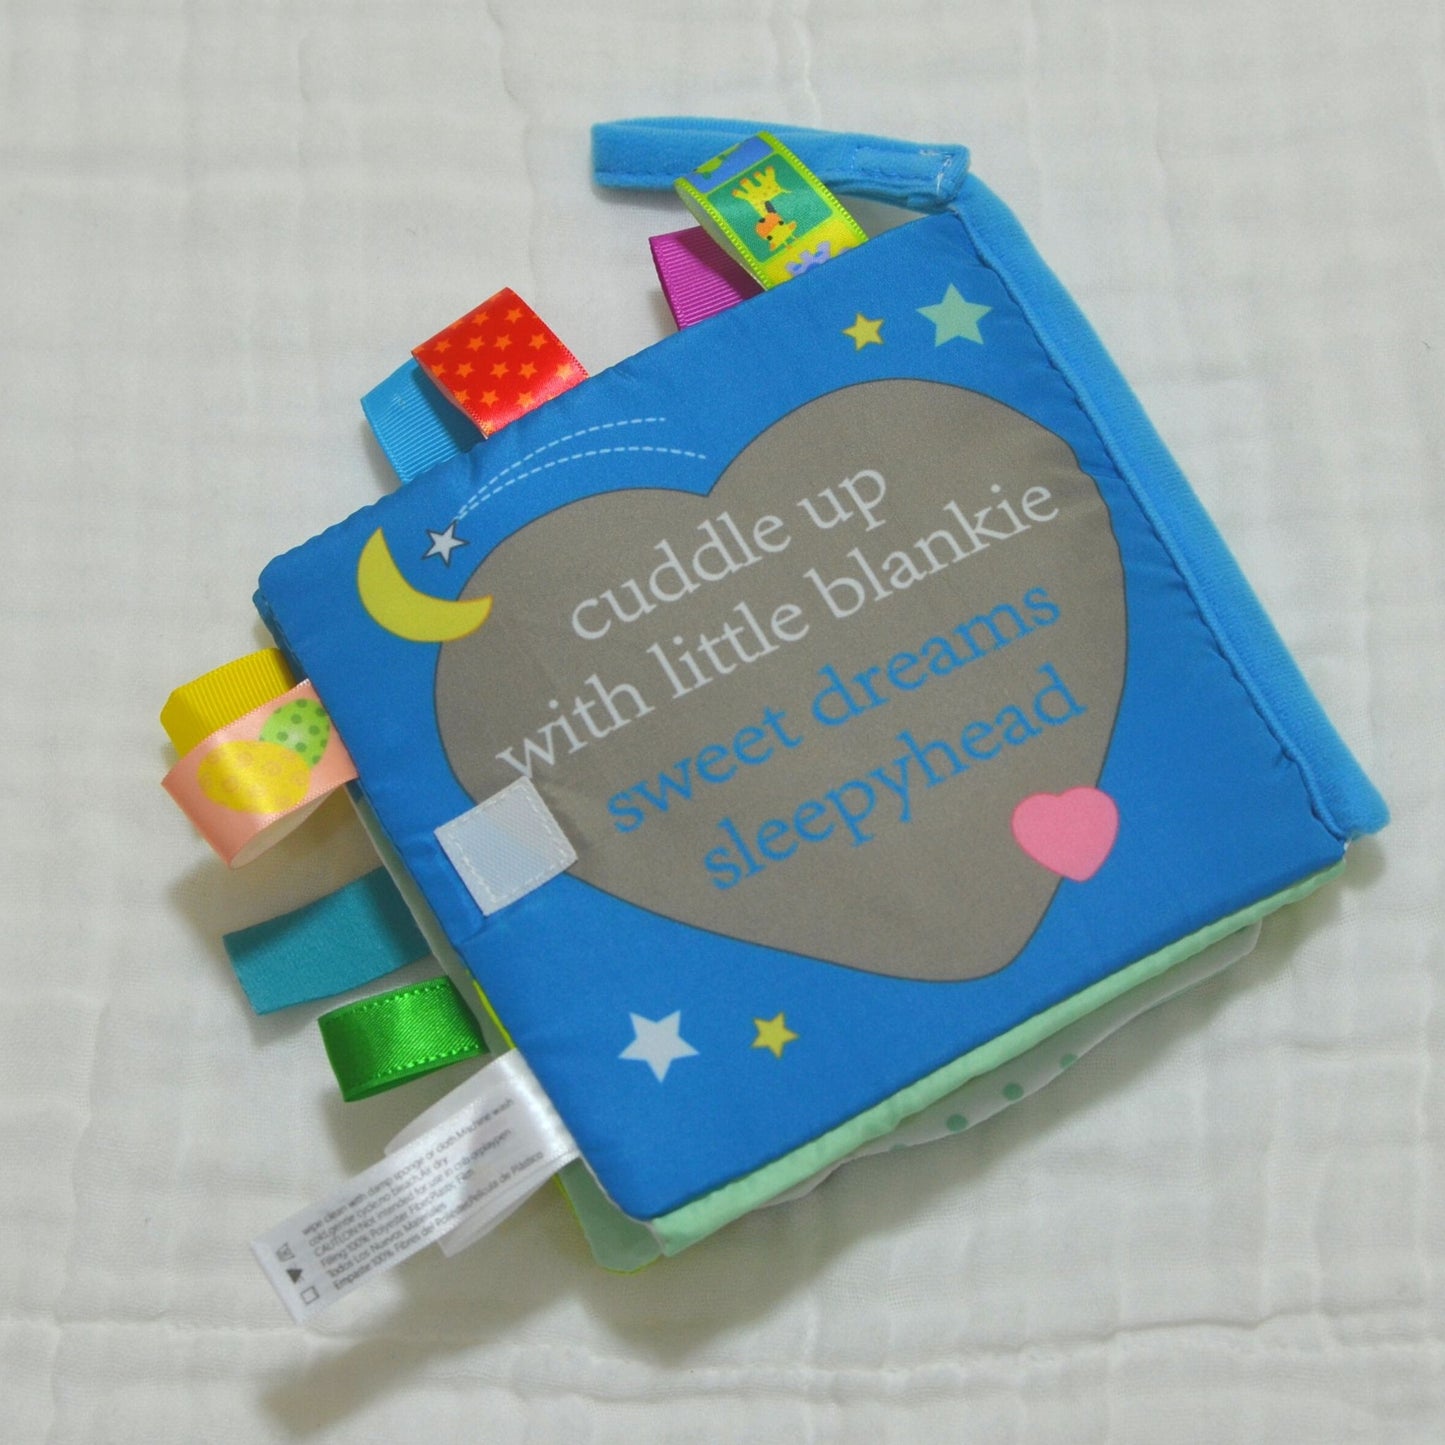 Touch and Feel Cloth Book - Little Elephant